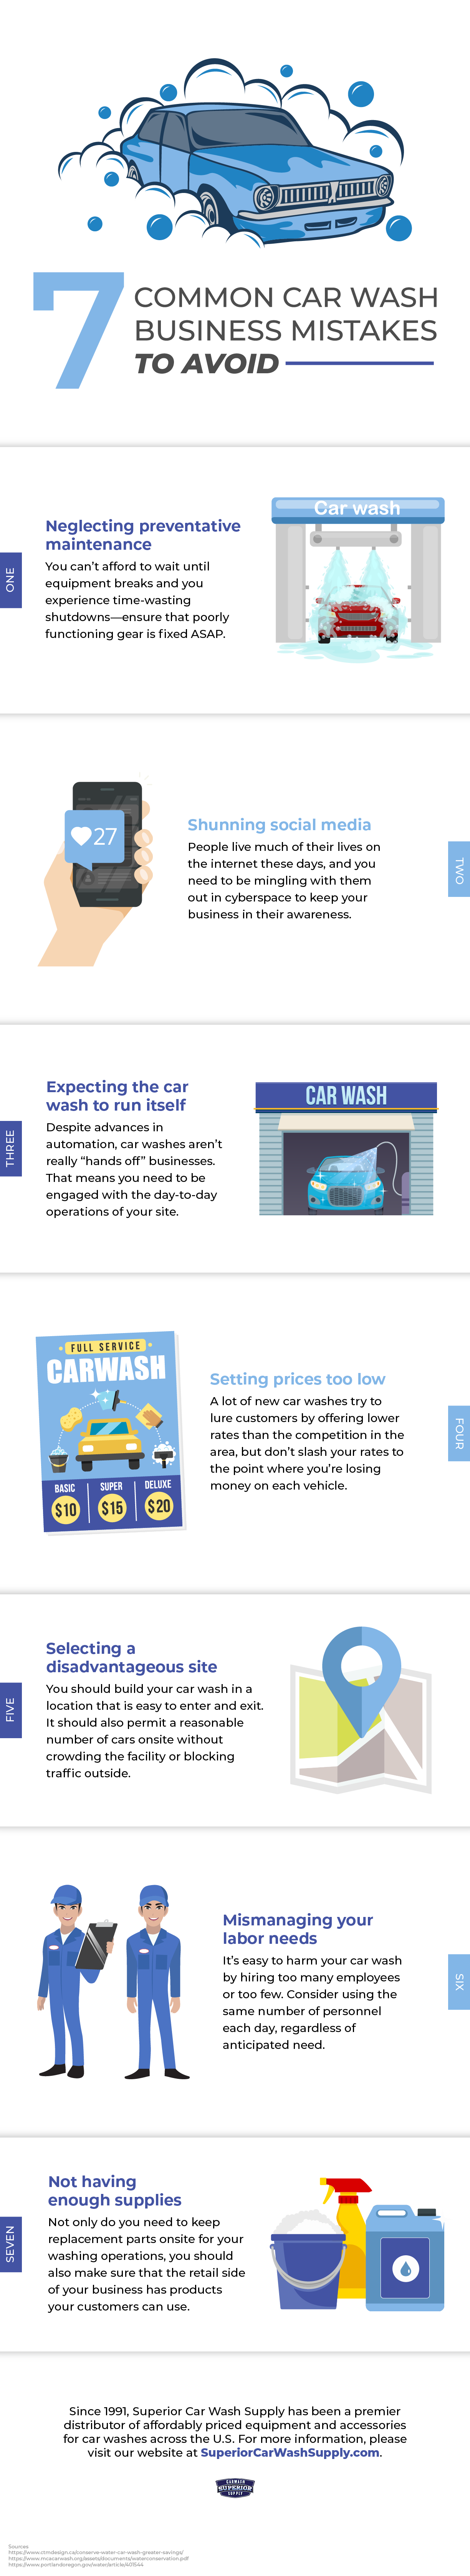 7 Common Car Wash Business Mistakes to Avoid